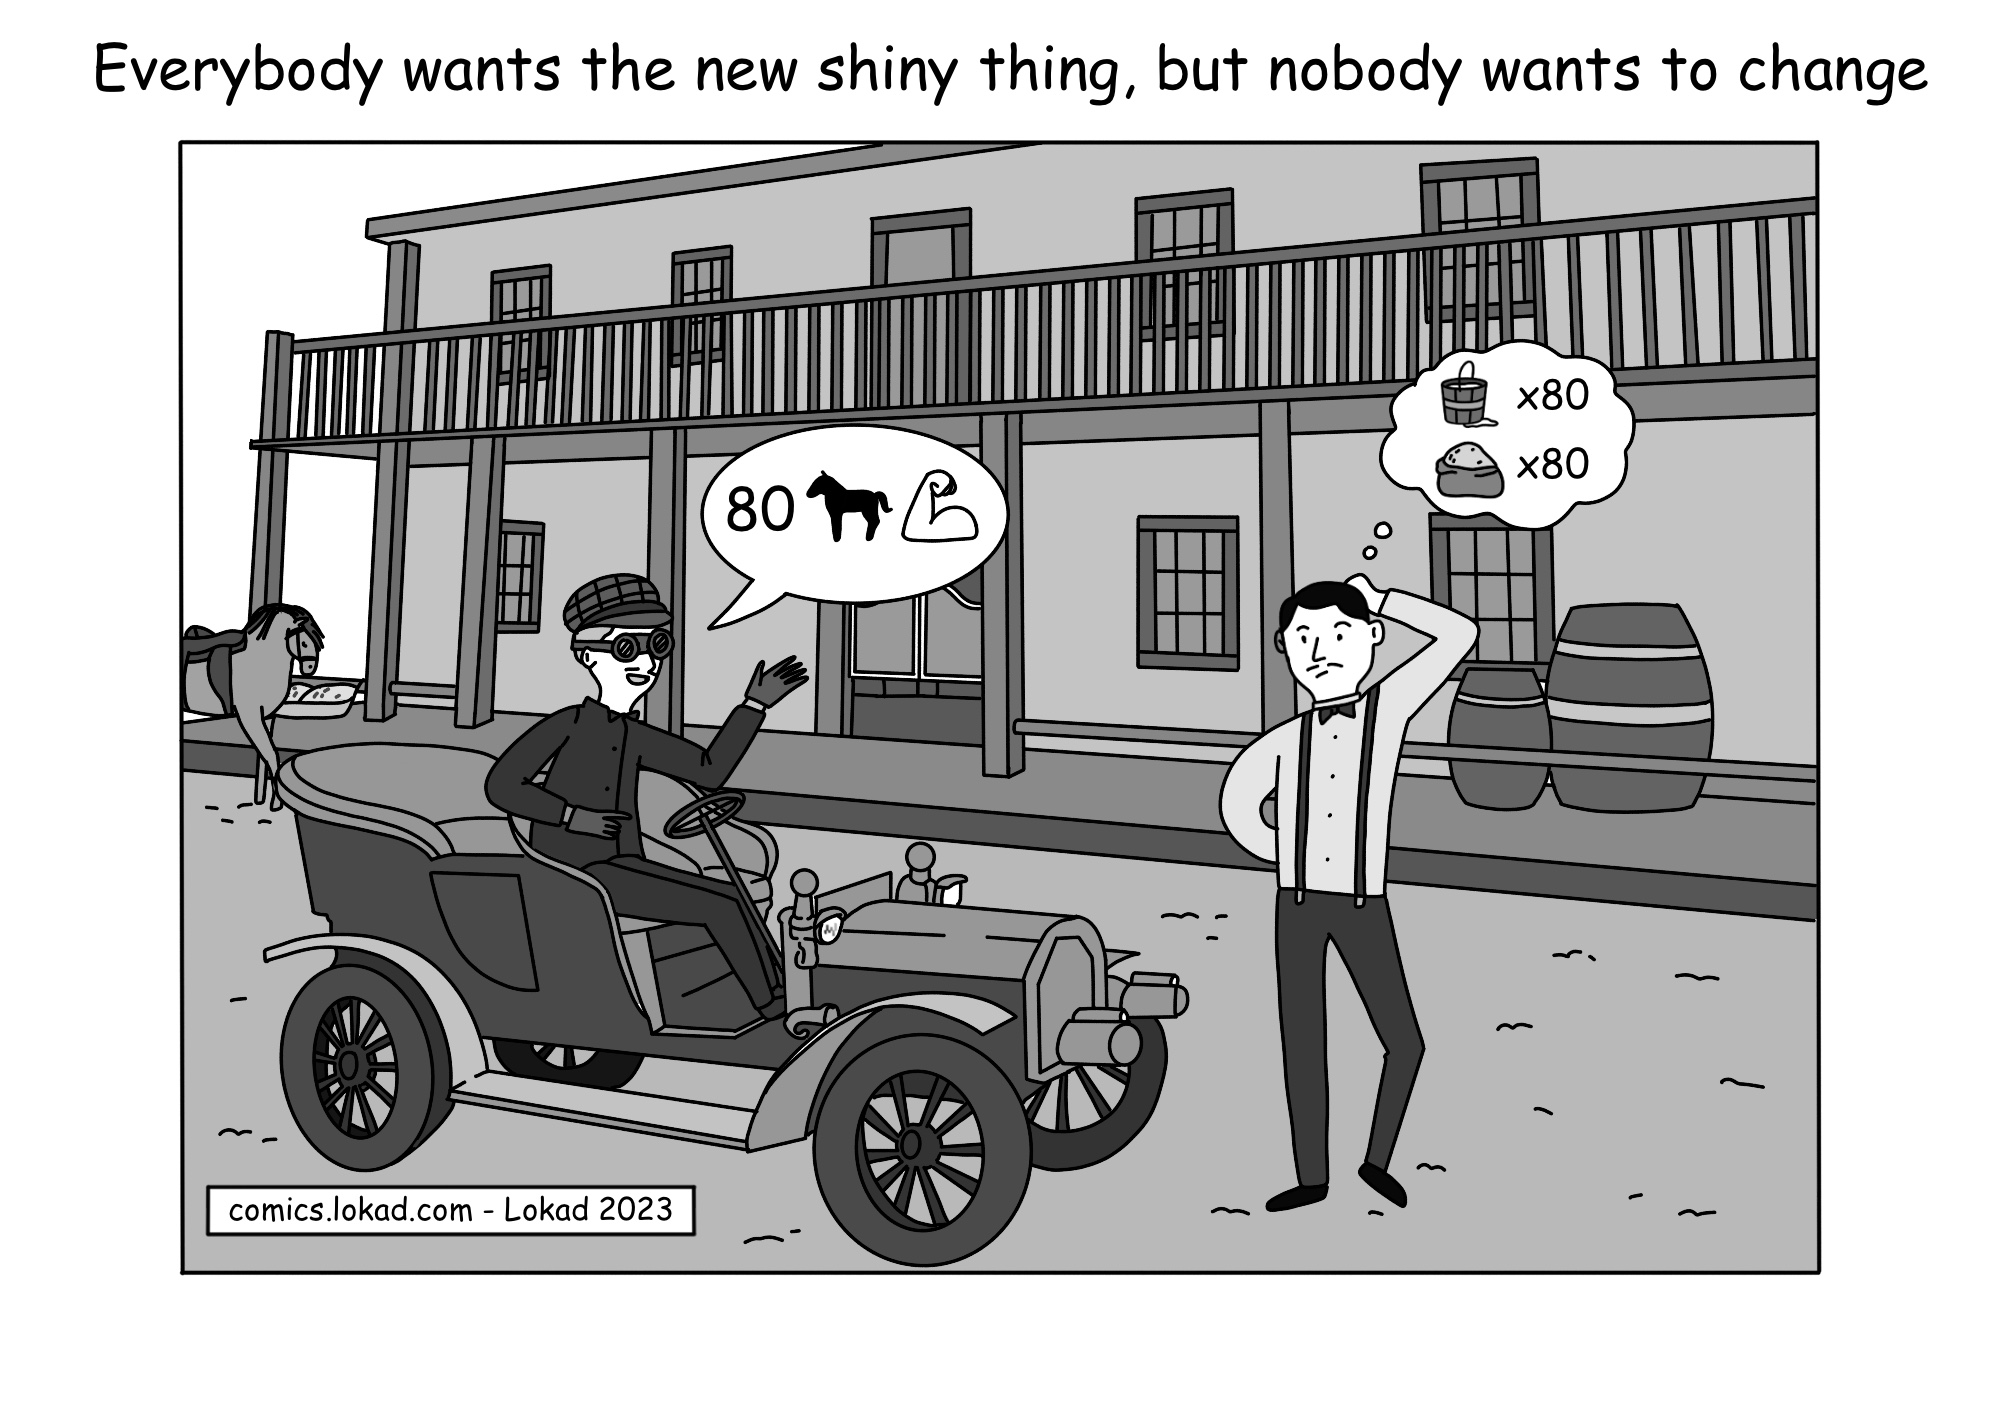 Everybody wants the new shiny thing, but nobody wants to change